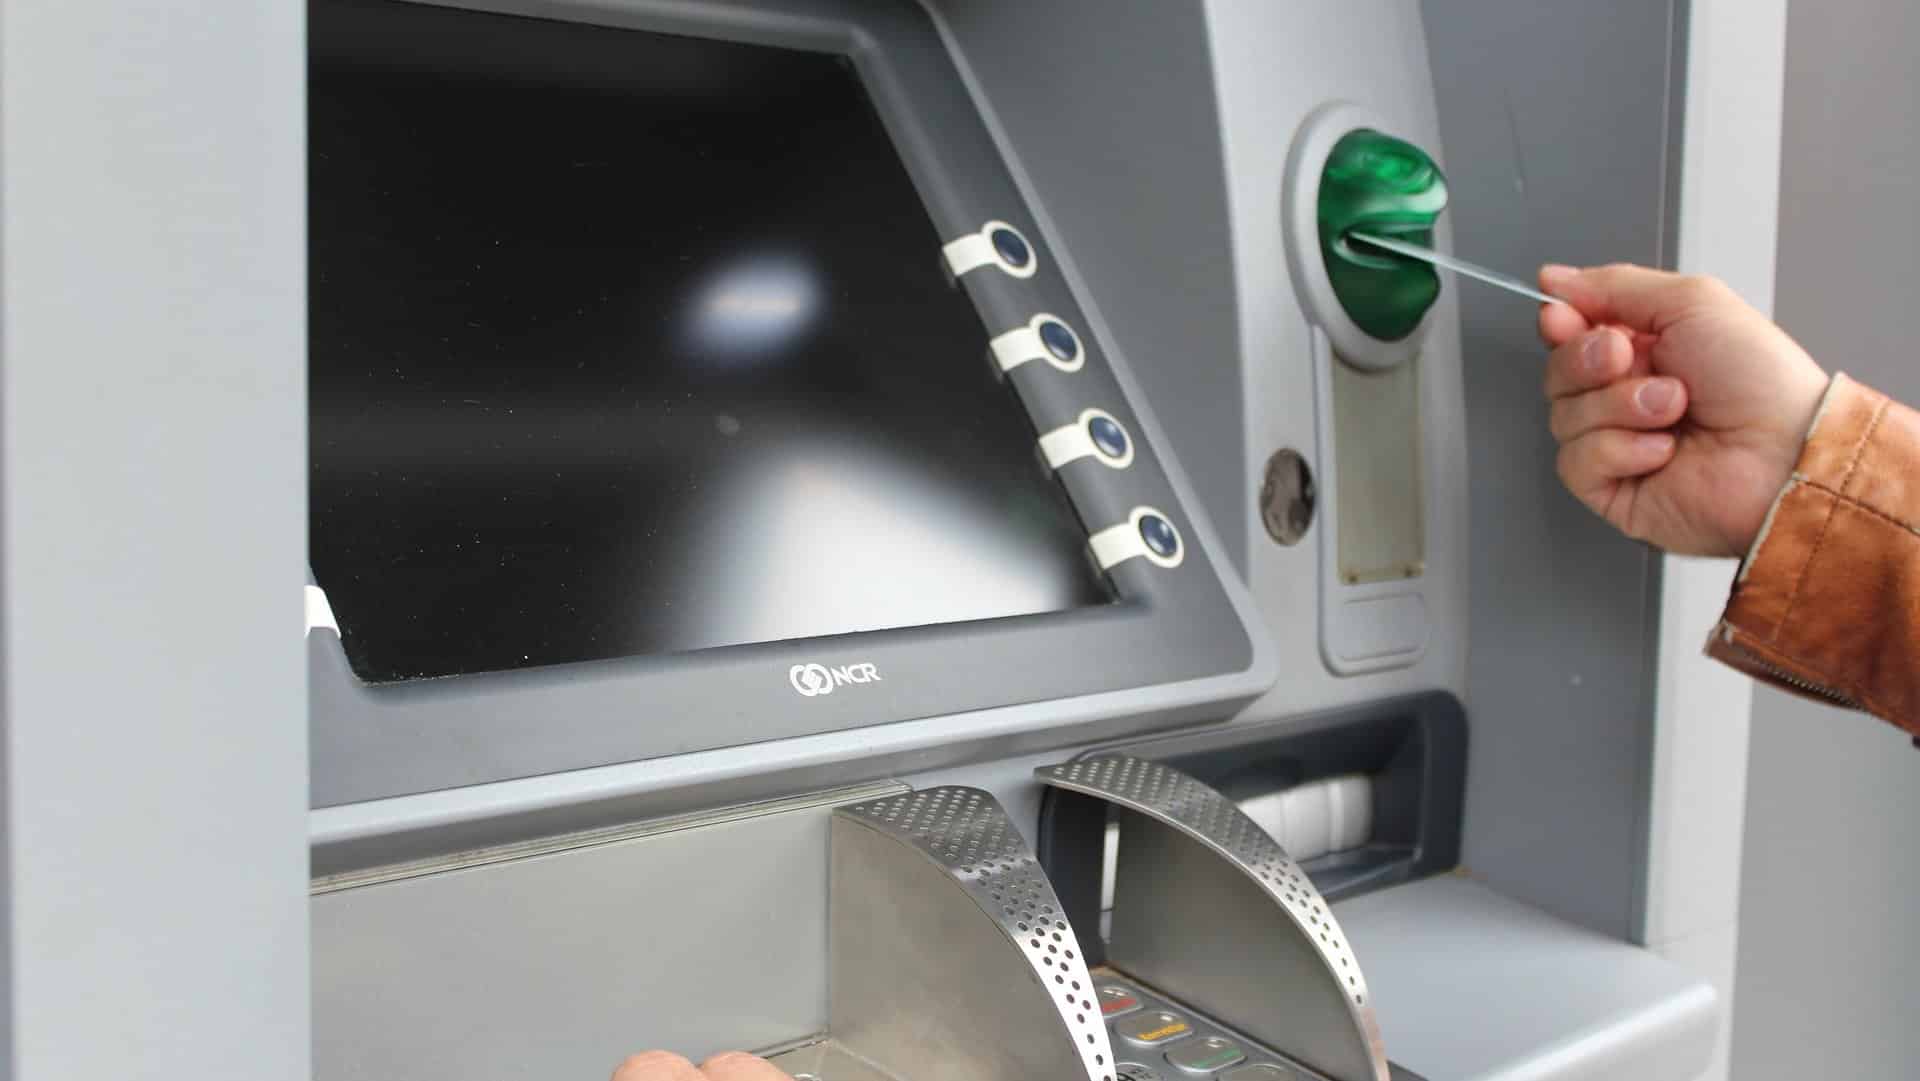 RBI to penalise banks for non-availability of cash in ATMs from Oct 1